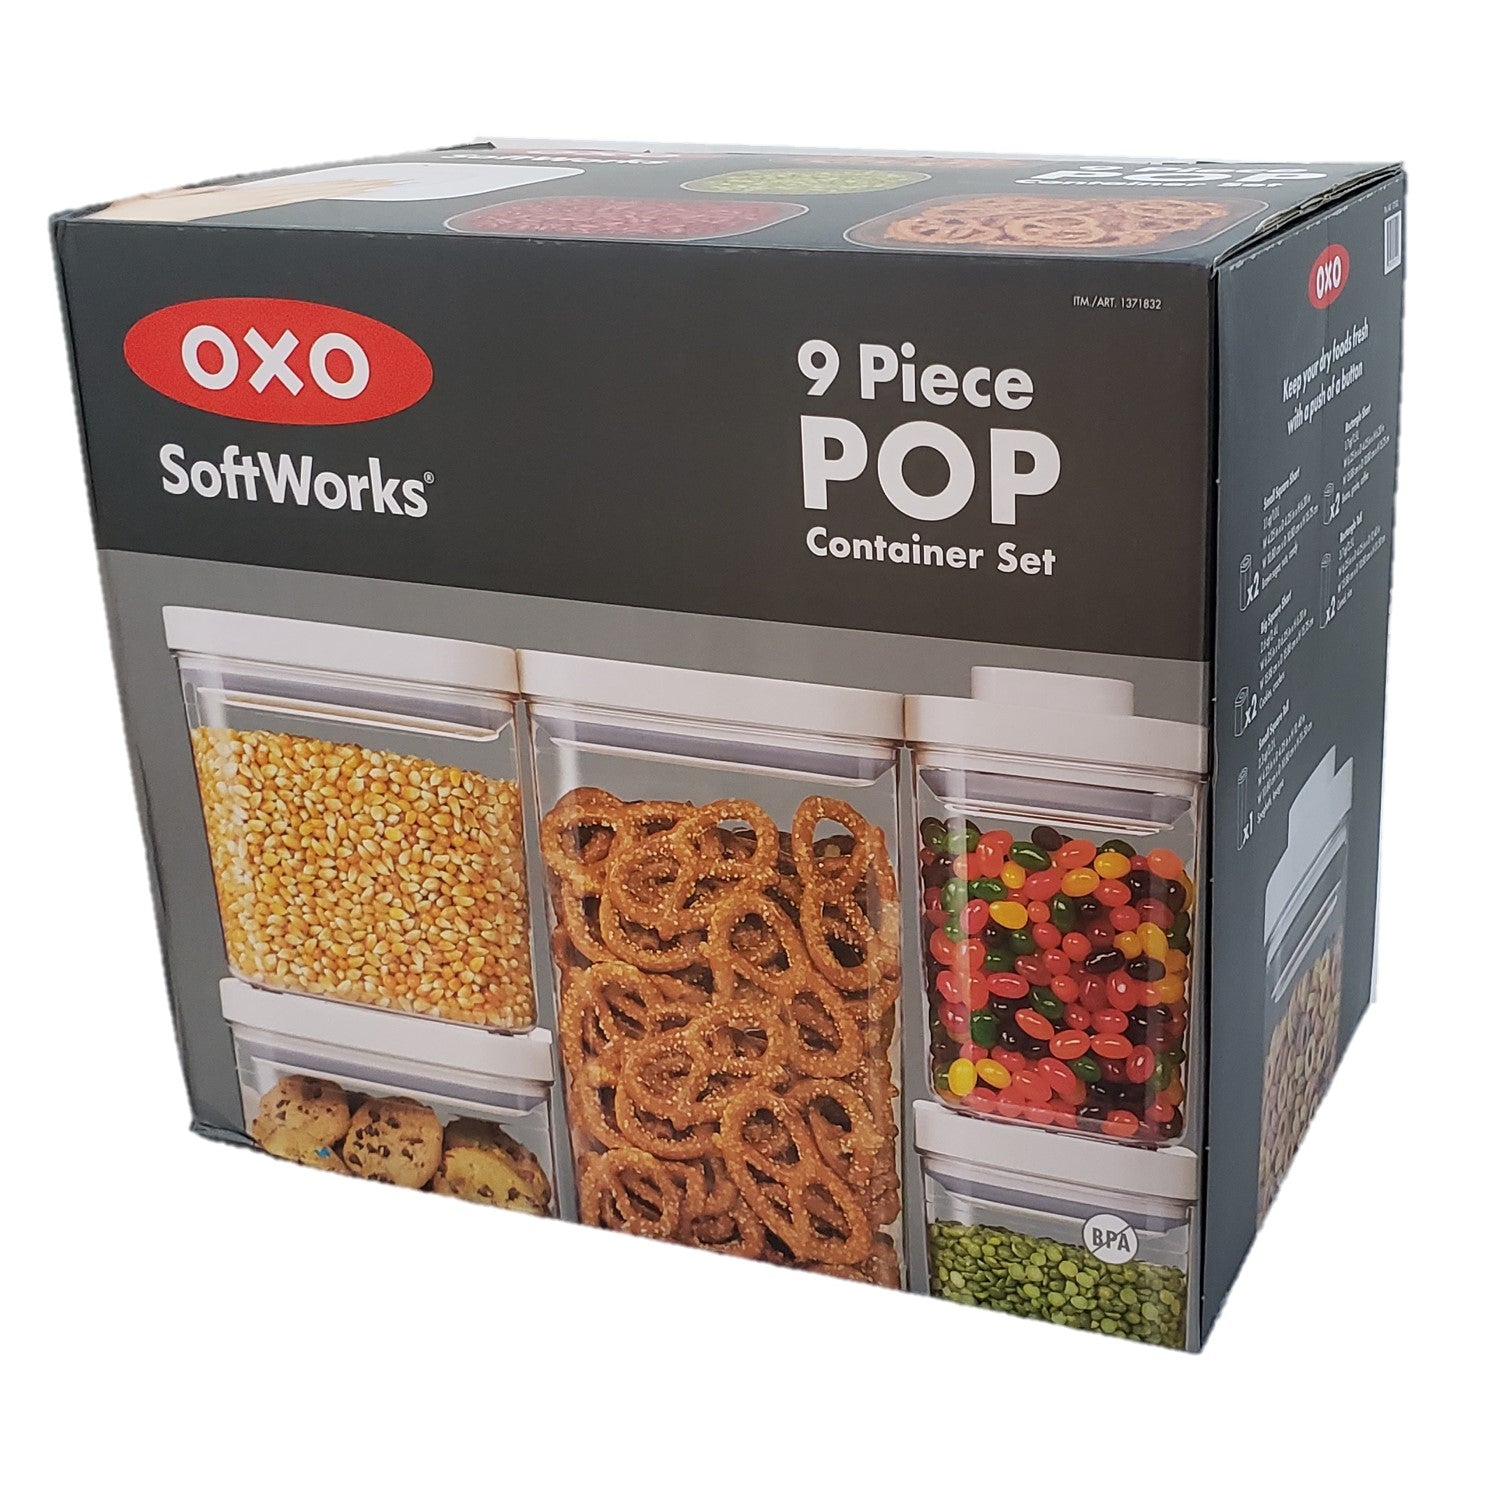 OXO Softworks 9-Piece POP Food Storage Container Set, Air Tight